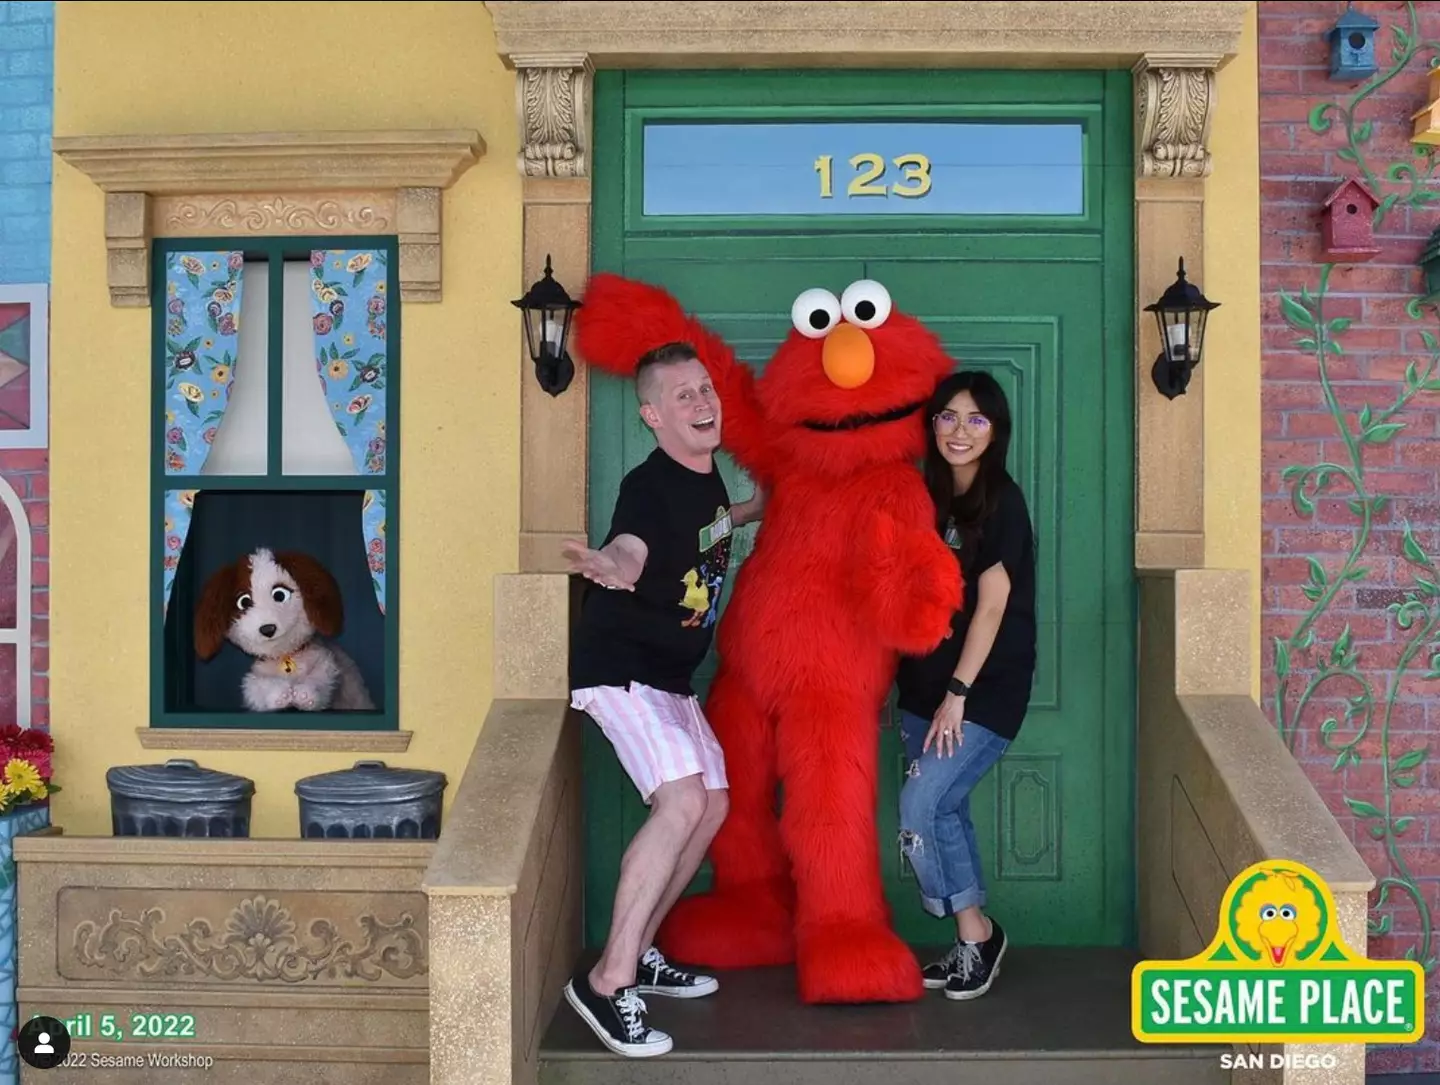 Culkin and Song celebrated their son's first birthday at Sesame Place.